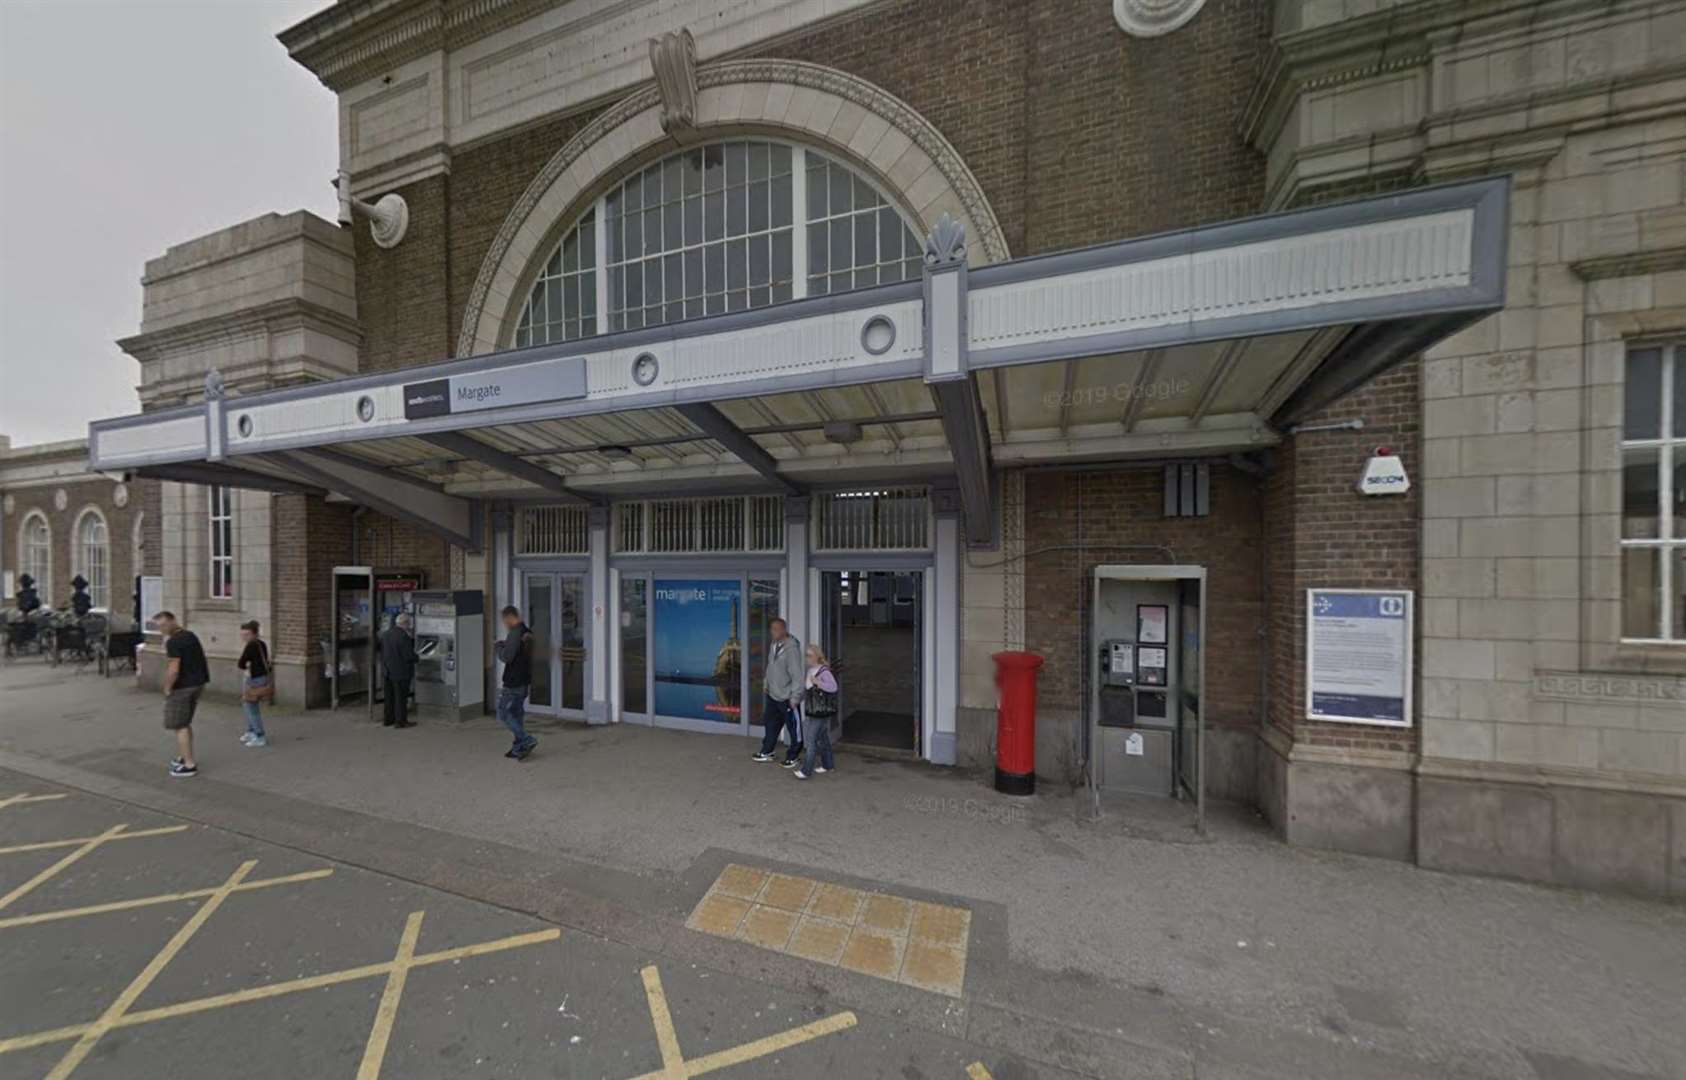 Trains had to be stopped after a reports of trespassers on the tracks near Margate. Picture: Google